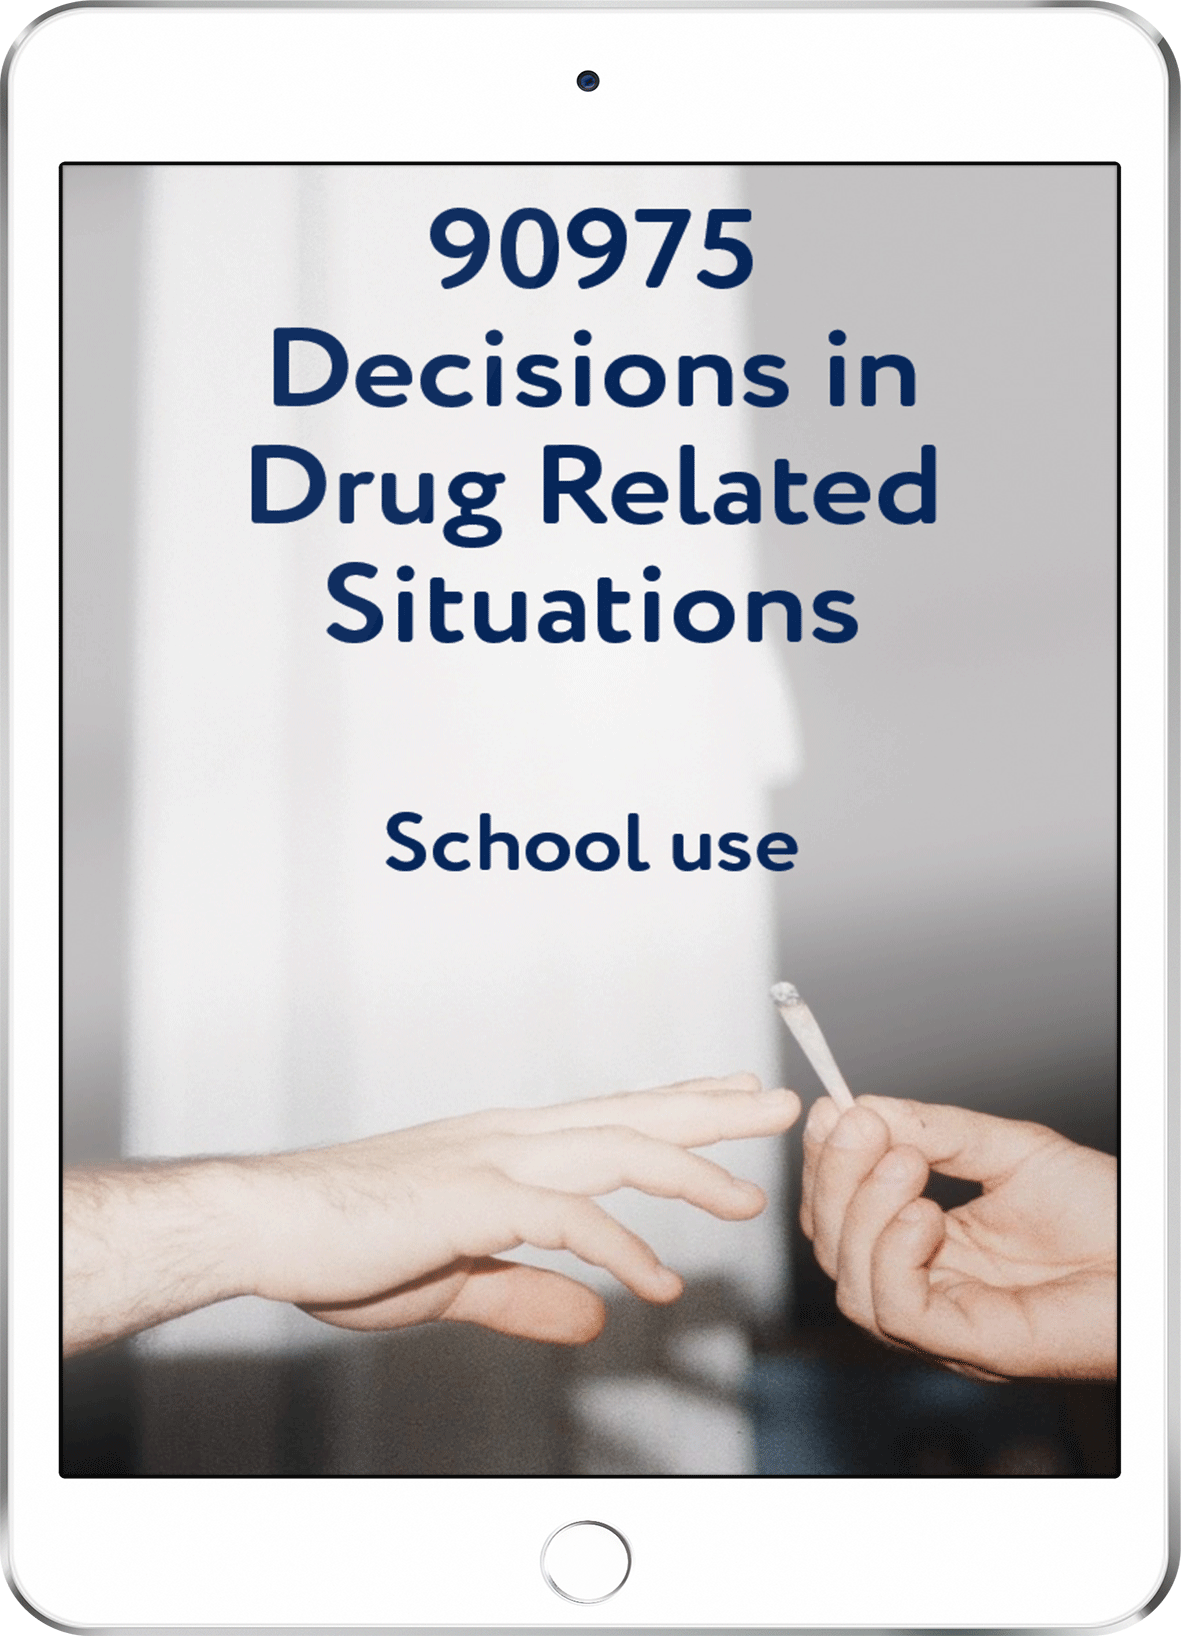 90975 Decisions in Drug Related Situations - School Use